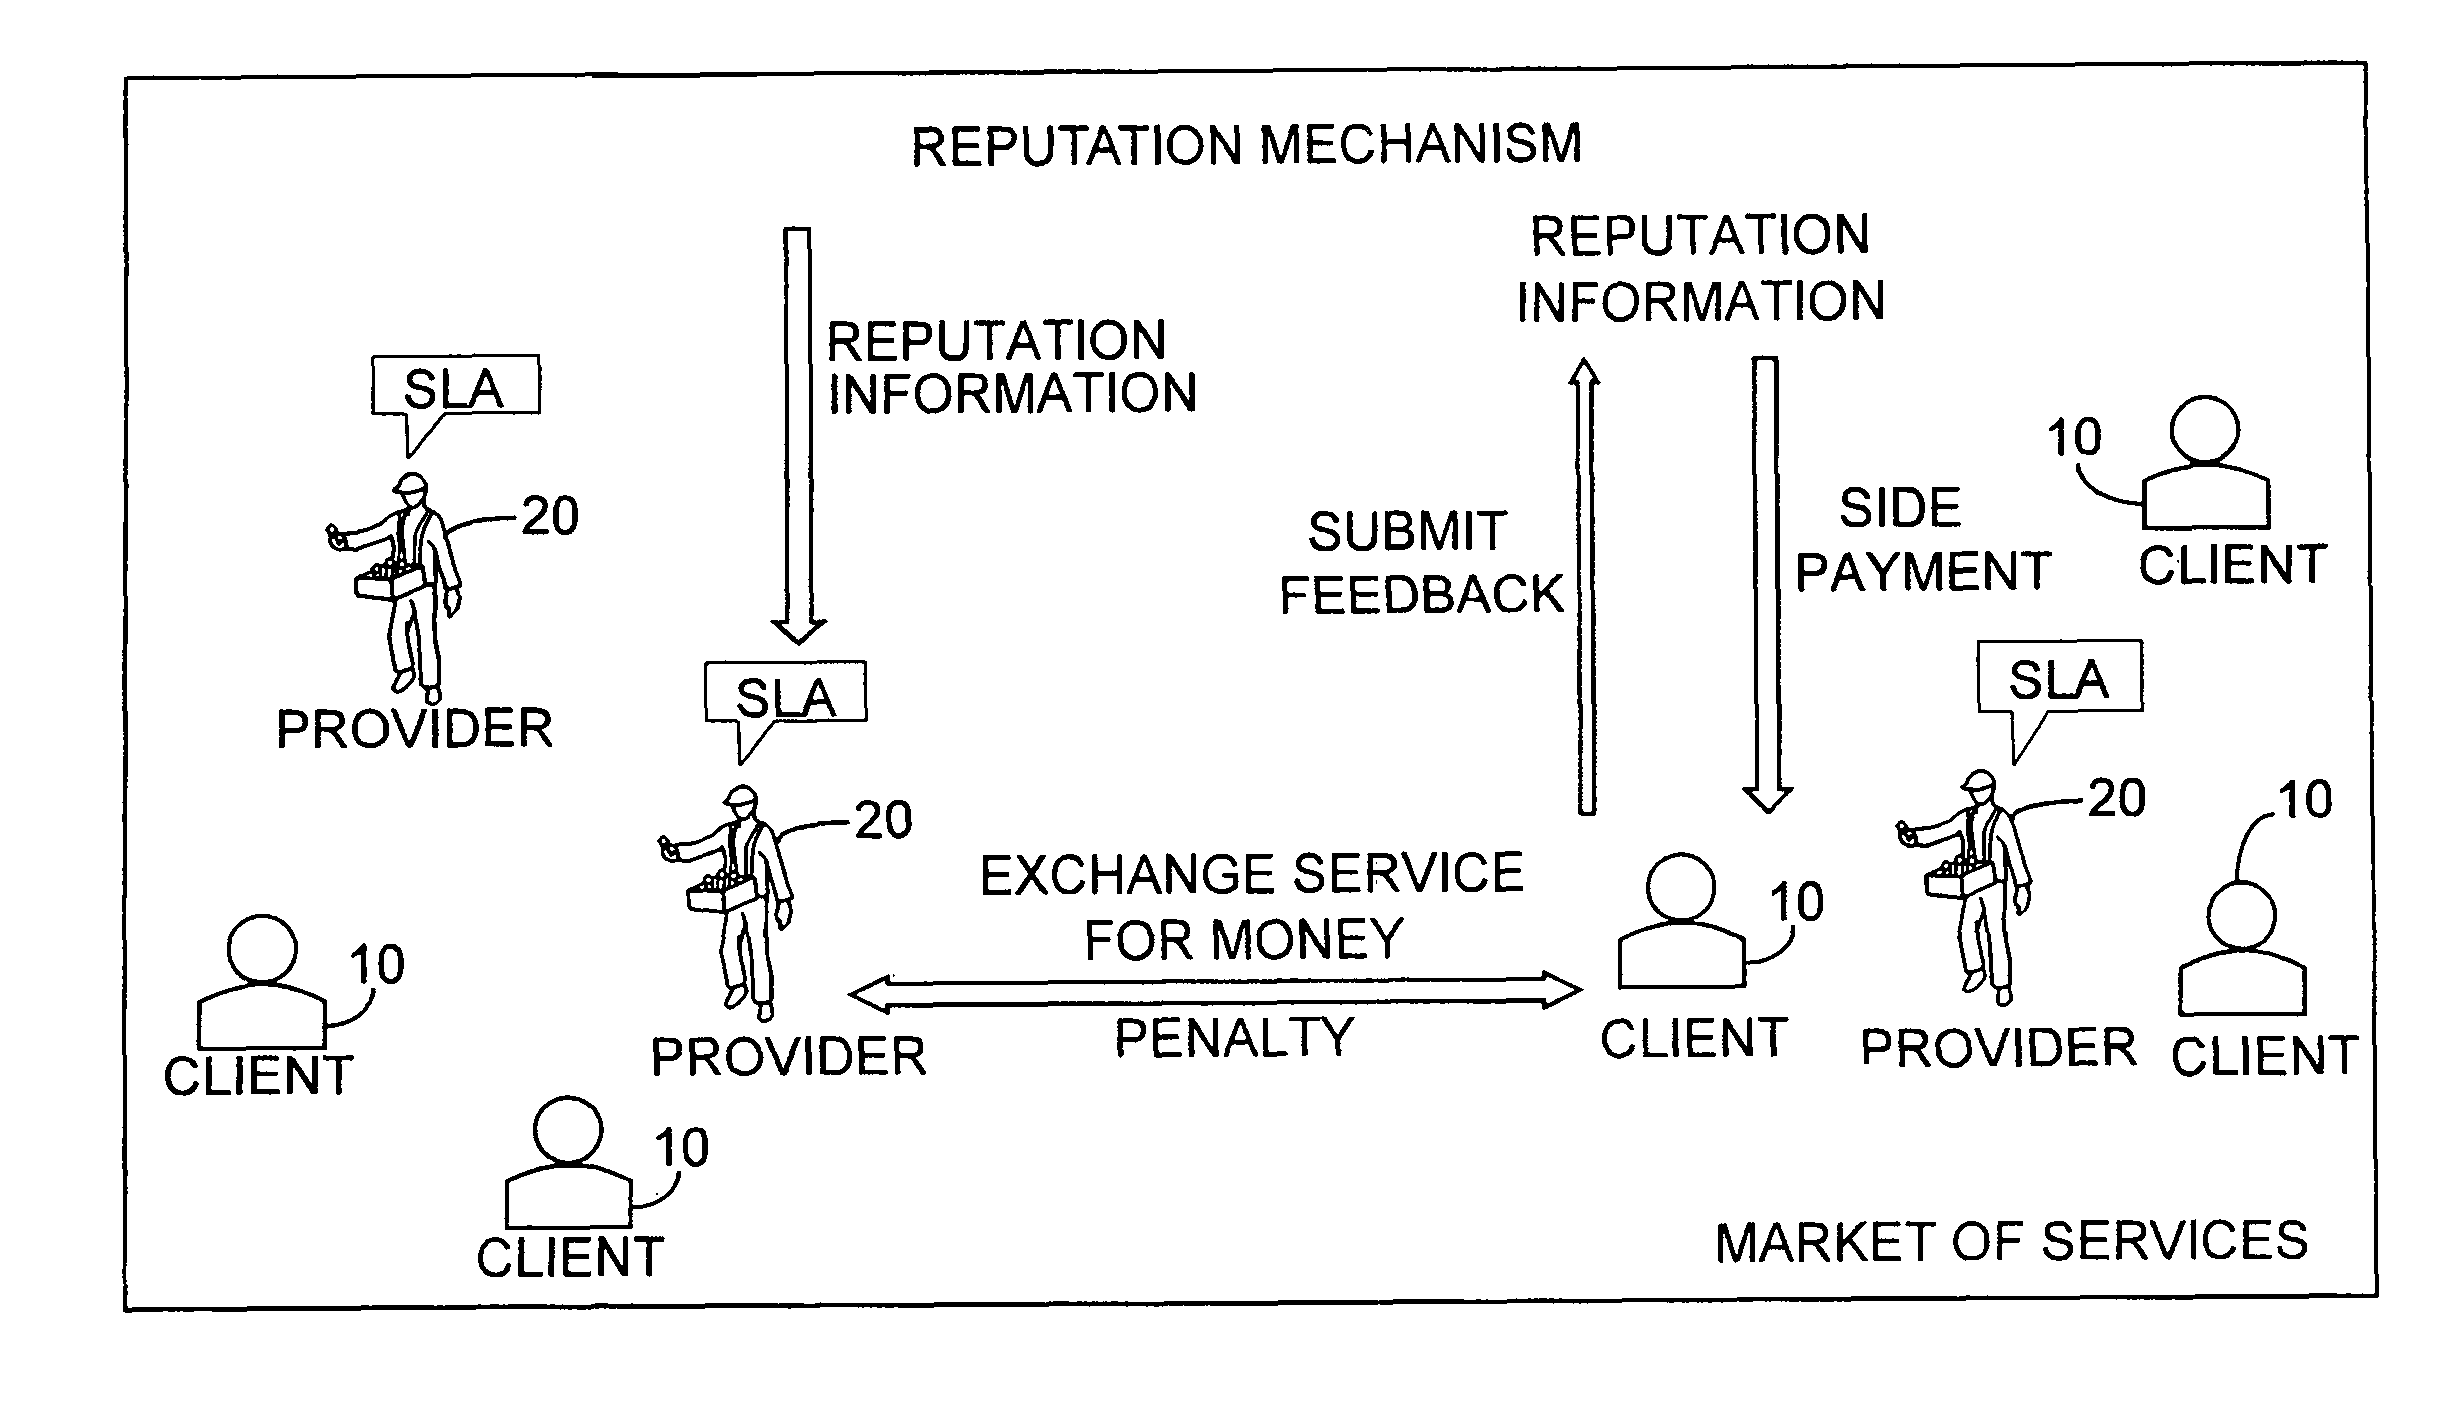 Quality of service monitoring of a service level agreement using a client based reputation mechanism encouraging truthful feedback